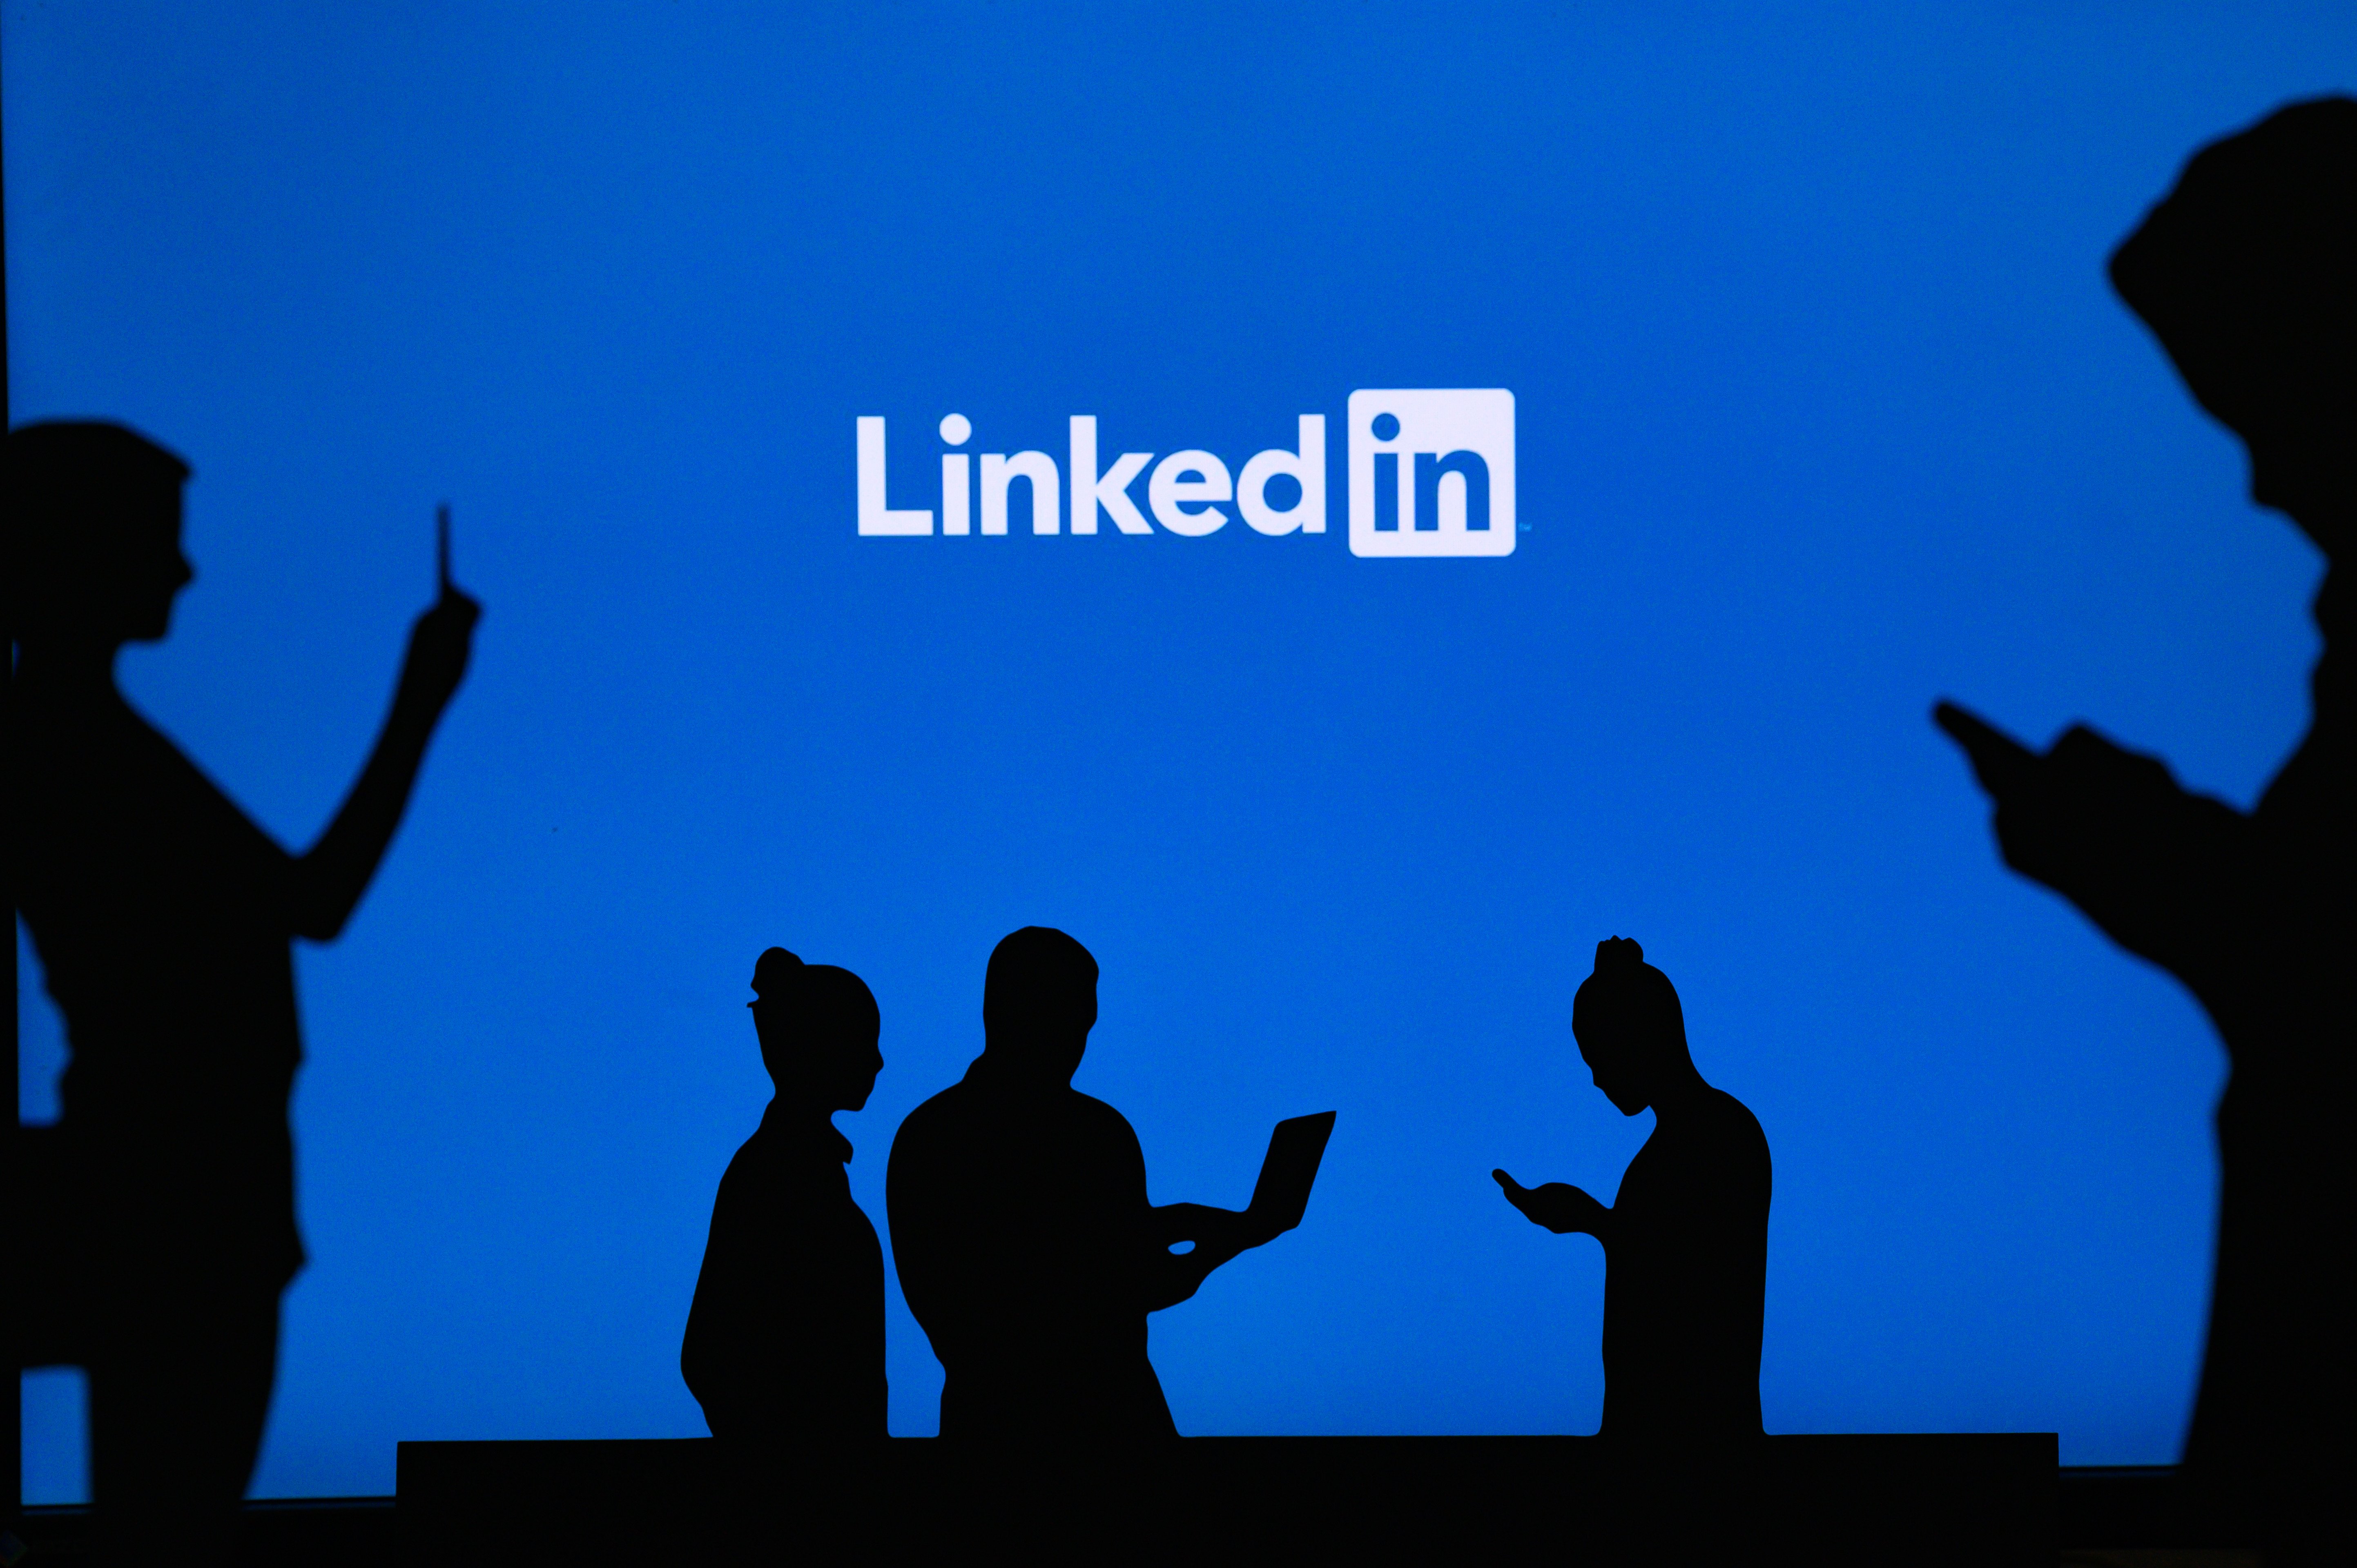 LinkedIn said it was investigating the incident. Photo: Shutterstock